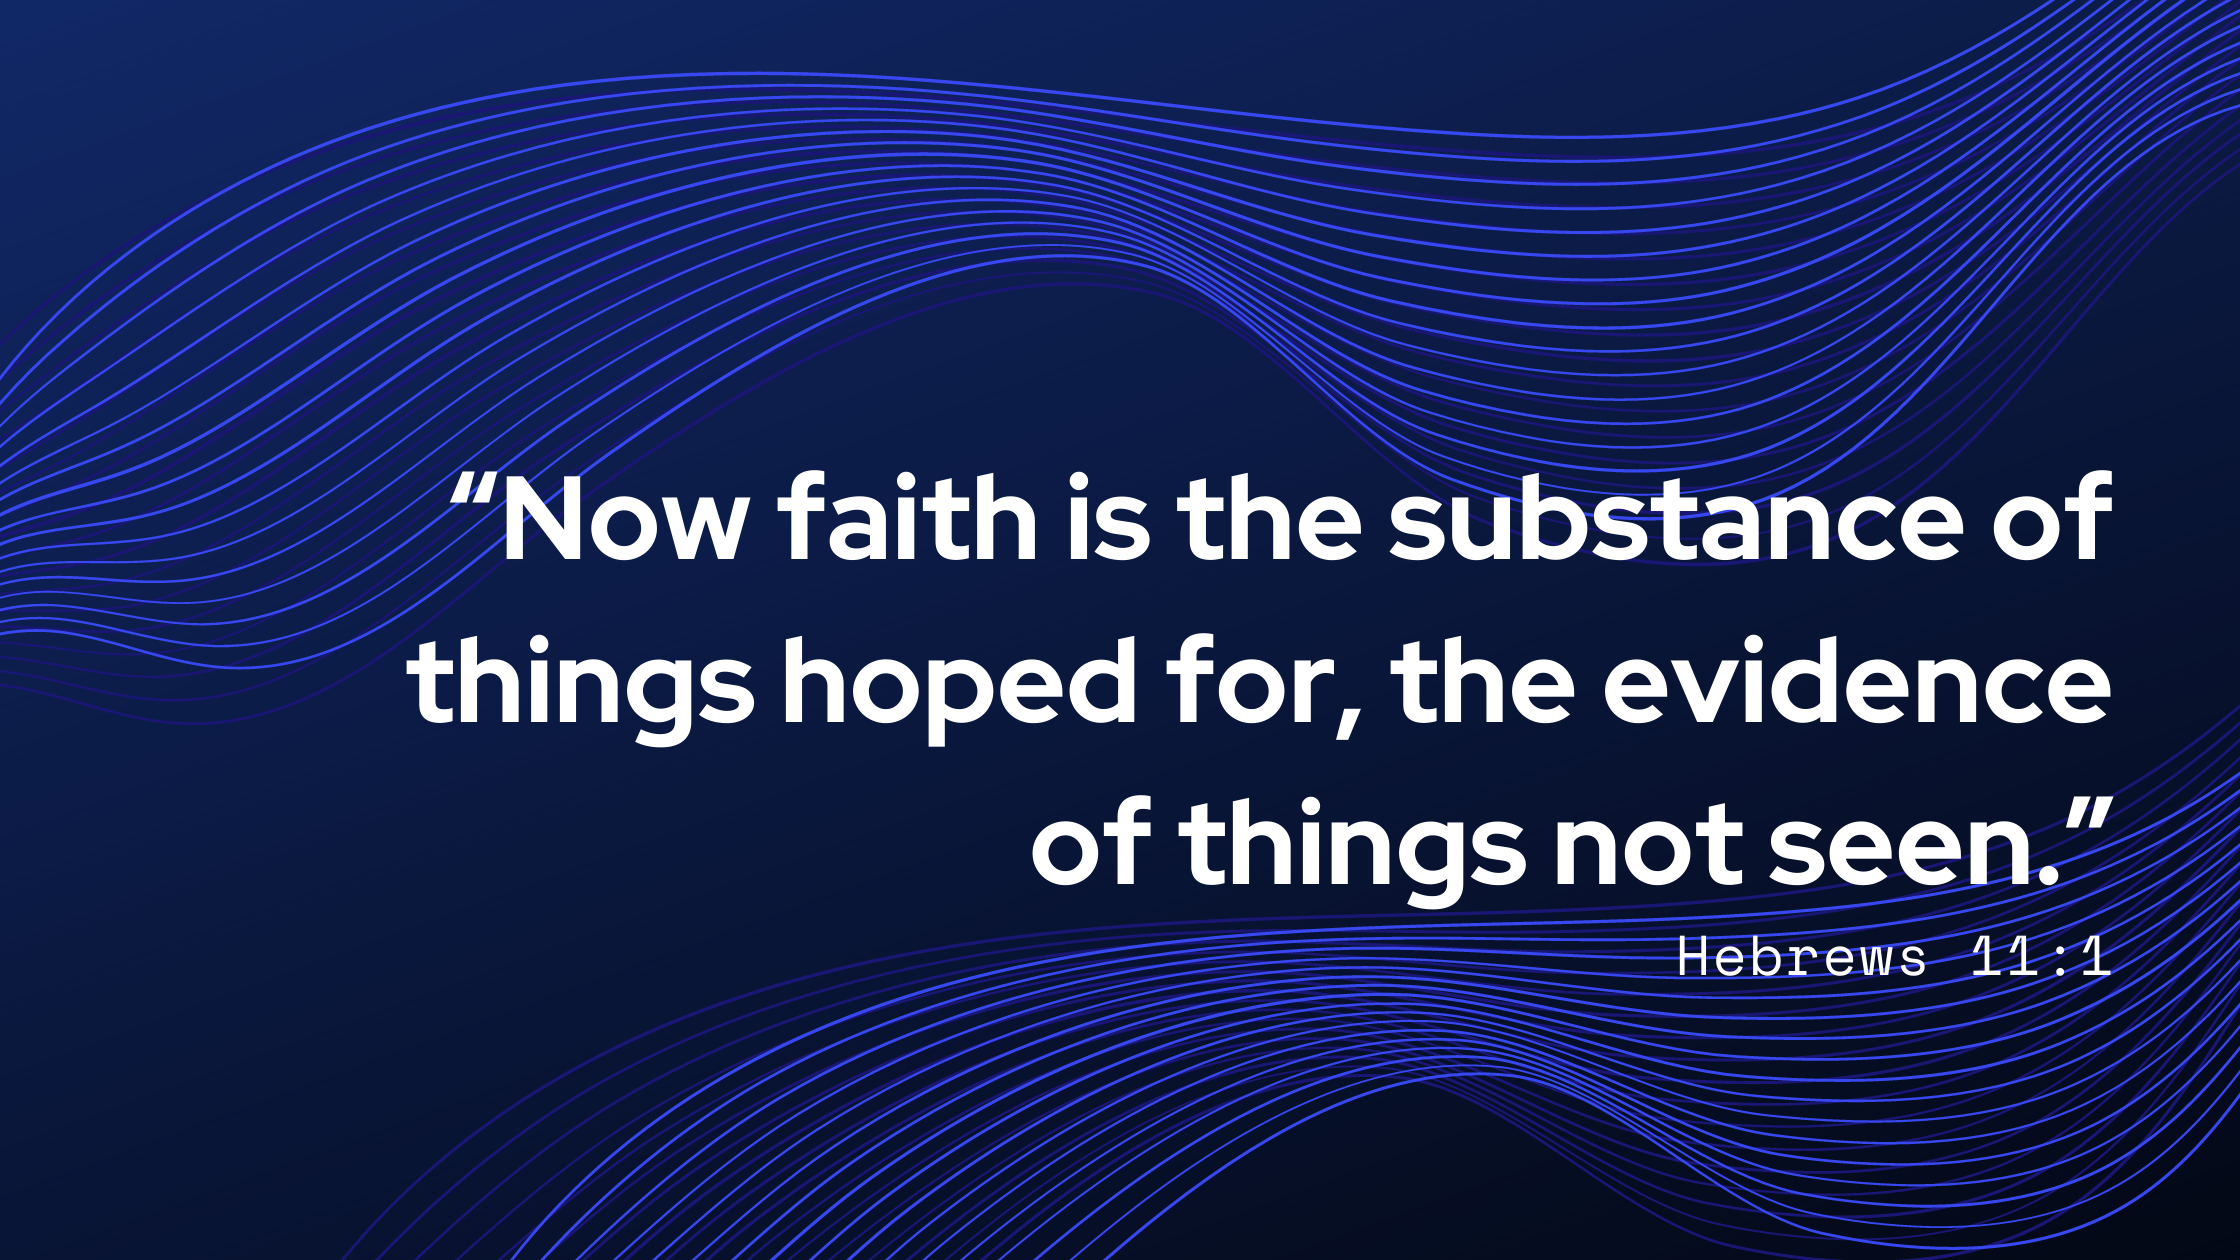 “Now faith is the substance of things hoped for, the evidence of things not seen.”